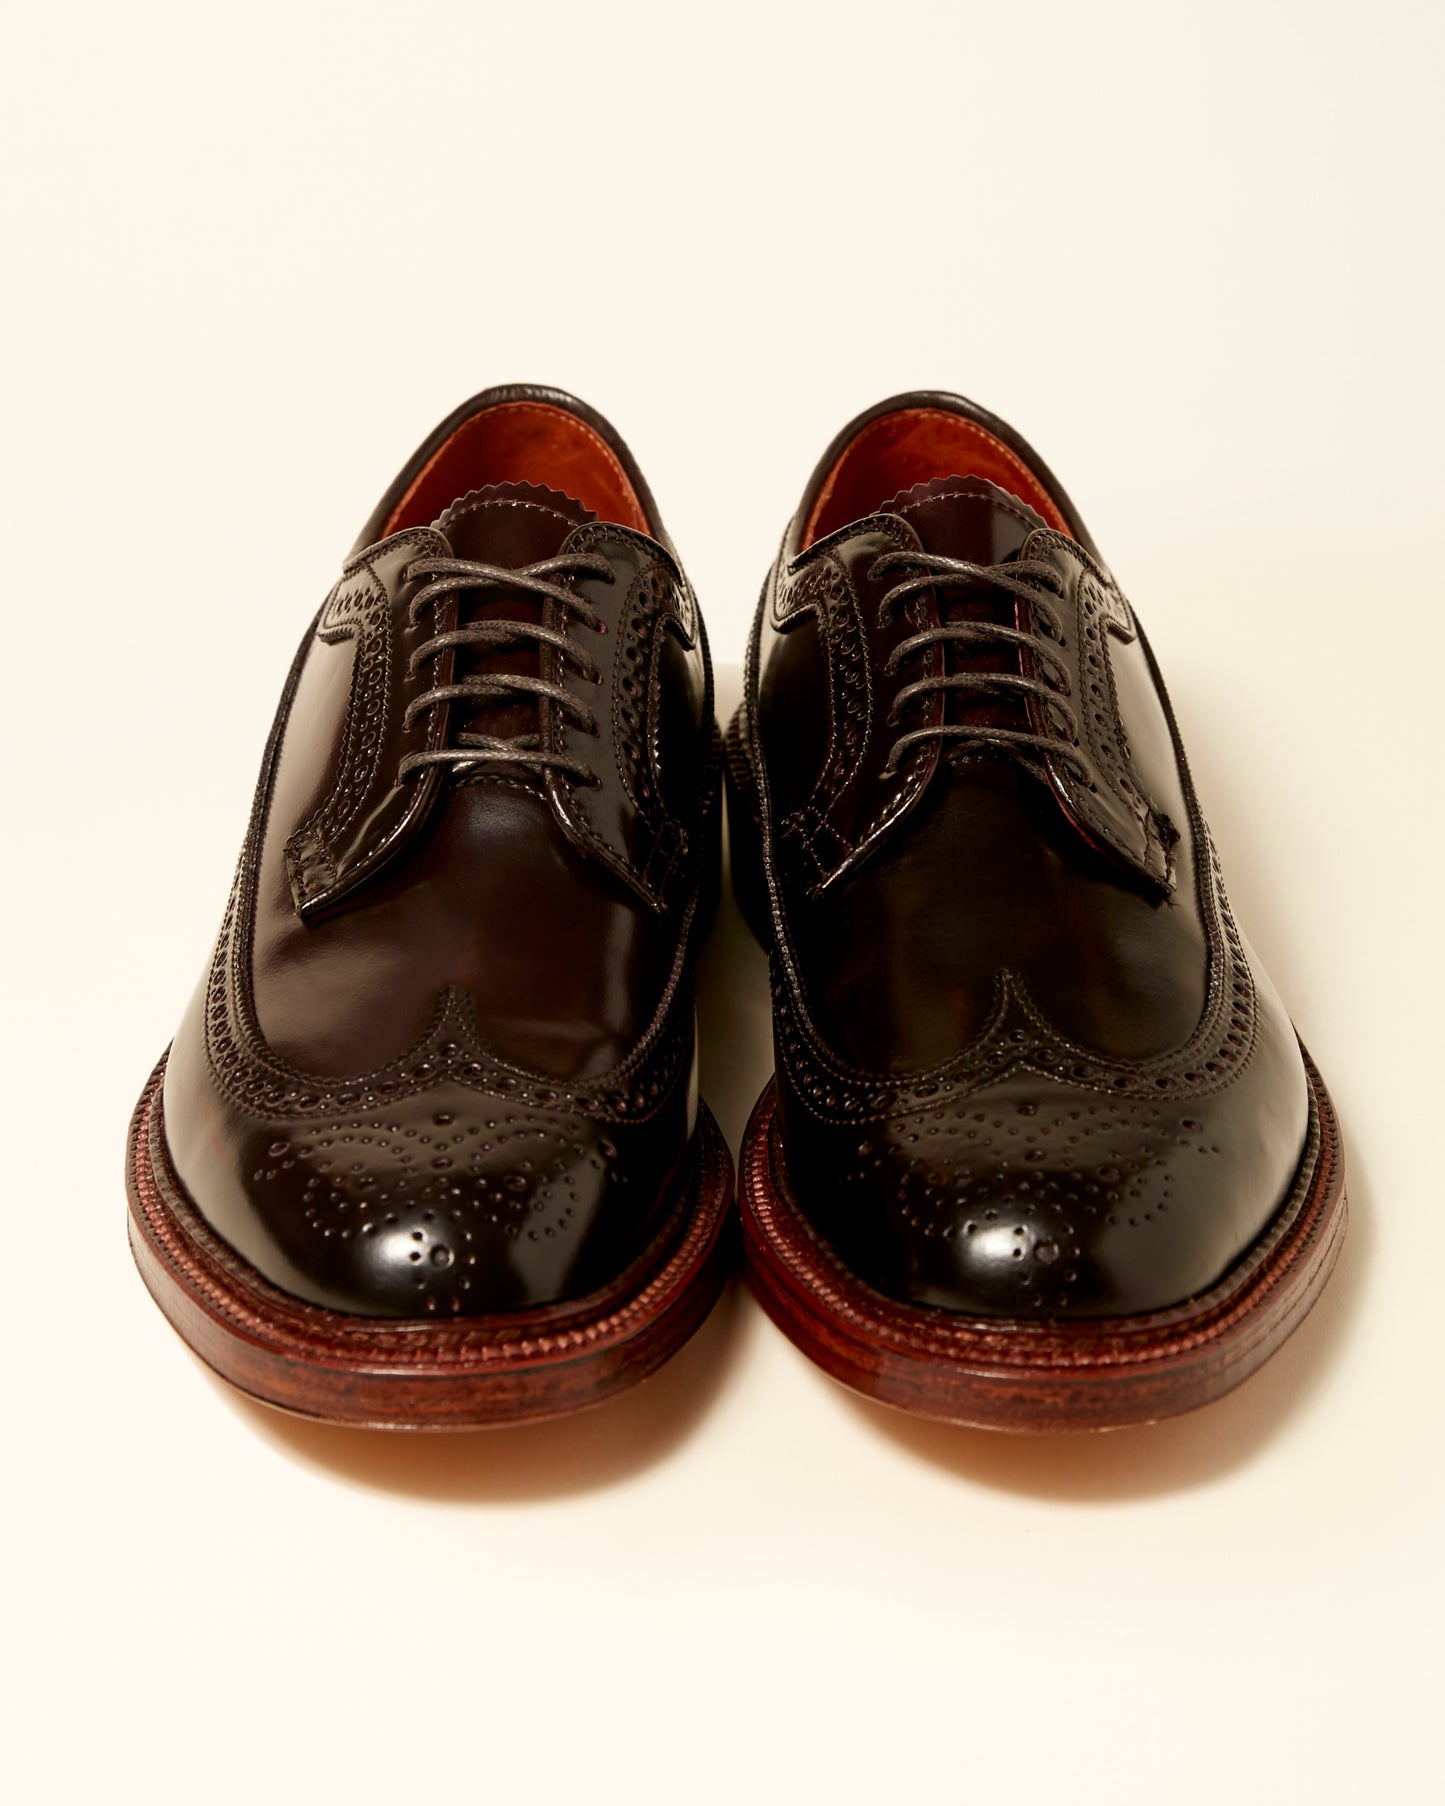 975A Long Wing Blucher in Color 8 Shell Cordovan, Barrie Last